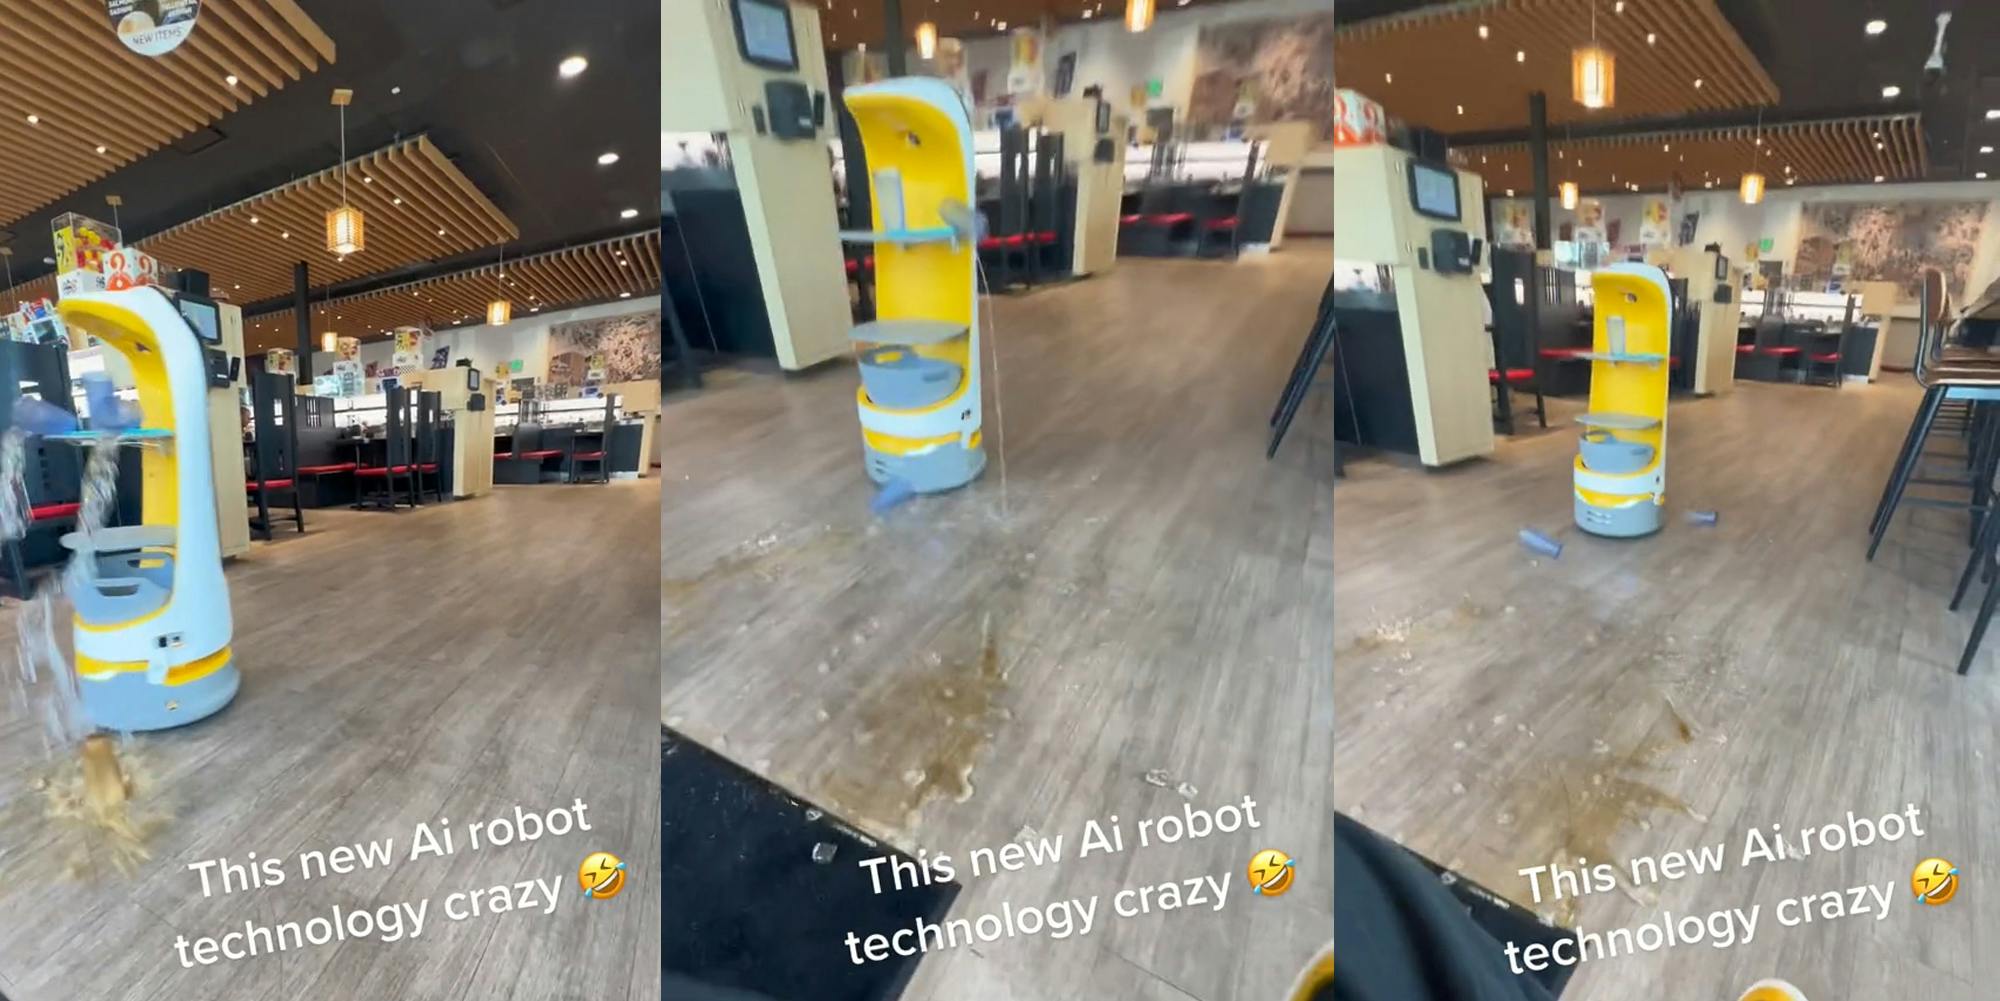 robot server spilling drinks all over floor with caption "This new Ai robot technology crazy" (l) robot server spilling drinks all over floor with caption "This new Ai robot technology crazy" (c) robot server spilling drinks all over floor with caption "This new Ai robot technology crazy" (r)